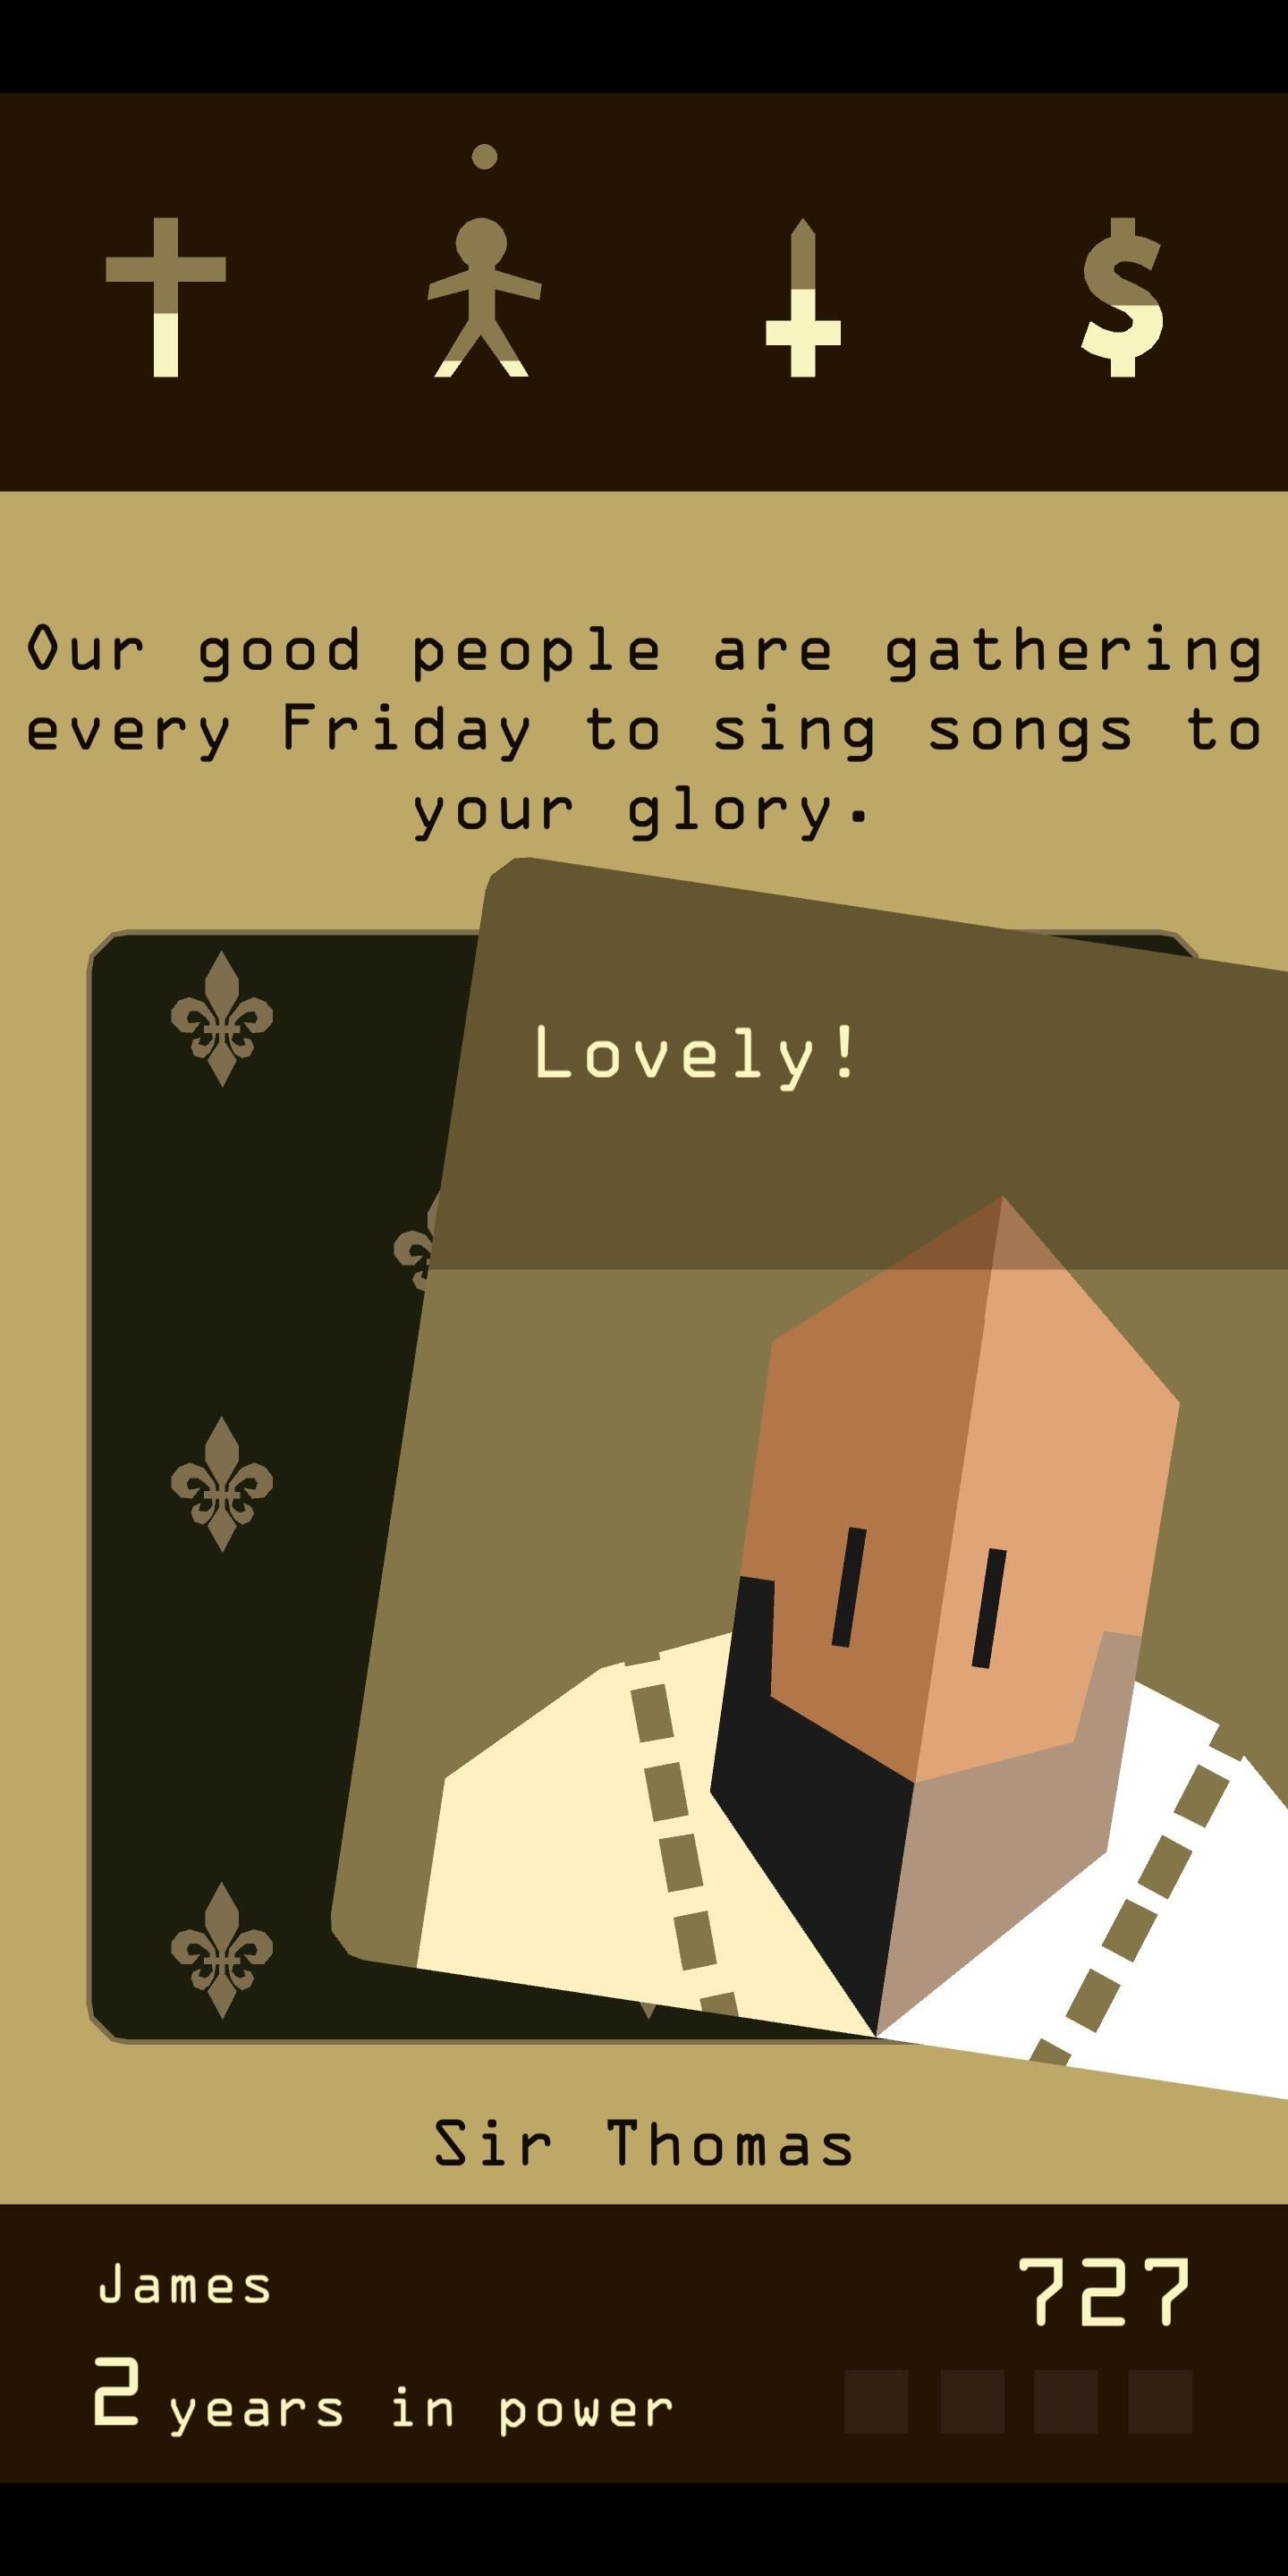 Review: Reigns — Game of Thrones Meets Tinder